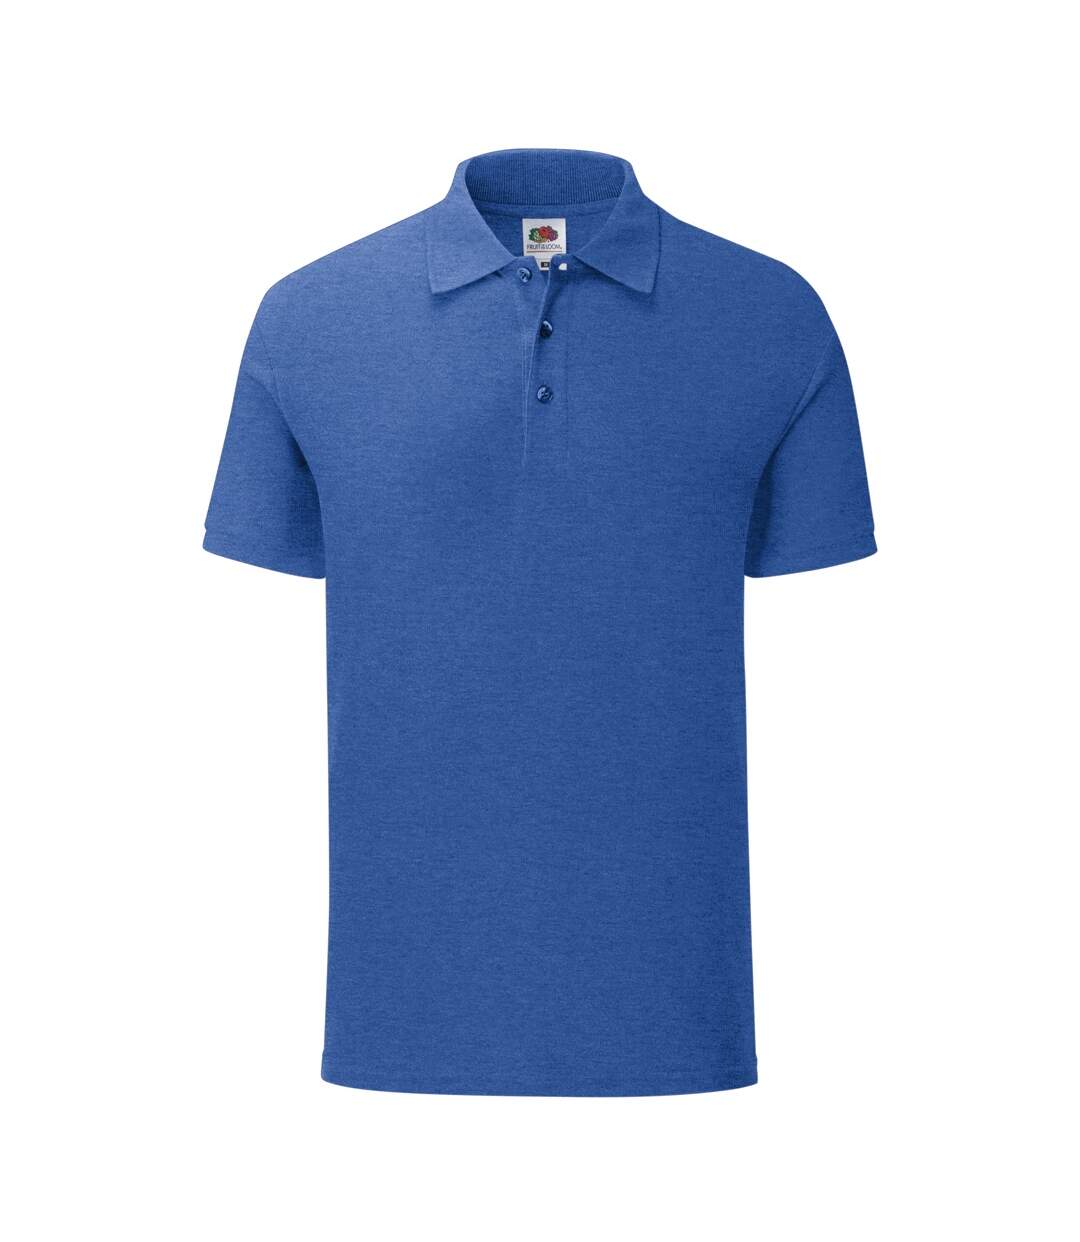 Fruit Of The Loom Mens Iconic Pique Polo Shirt (Heather Royal) - UTPC3571